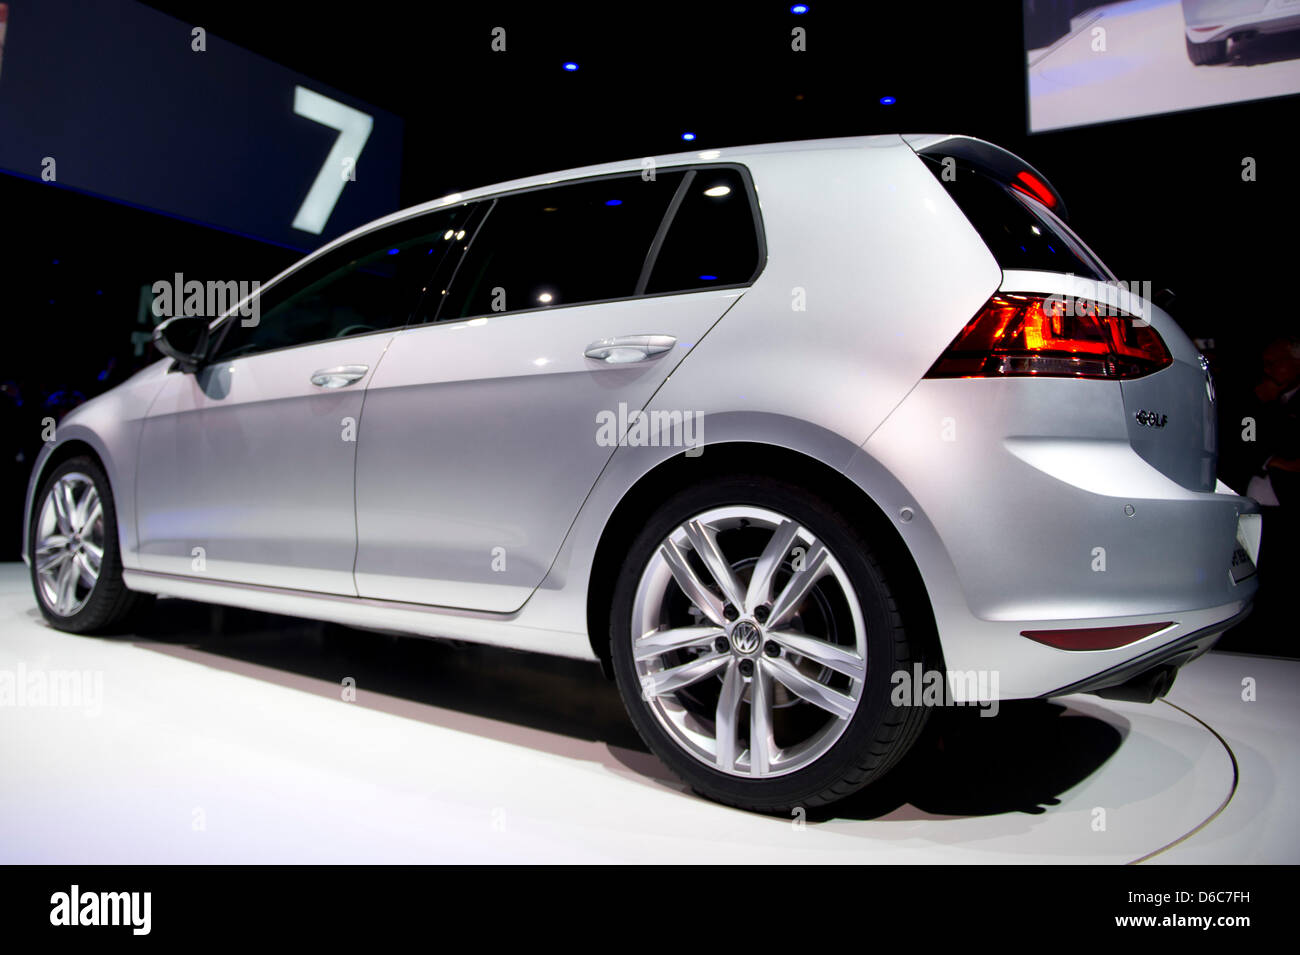 Vw Golf 2012 High Resolution Stock Photography and Images - Alamy